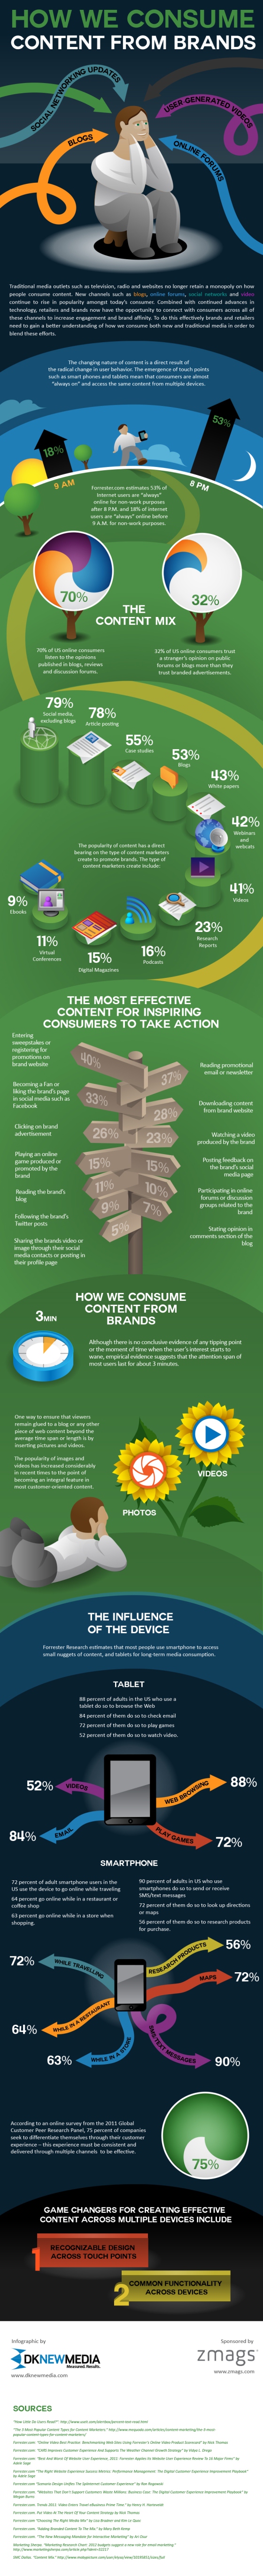 How users are consuming brands' content 